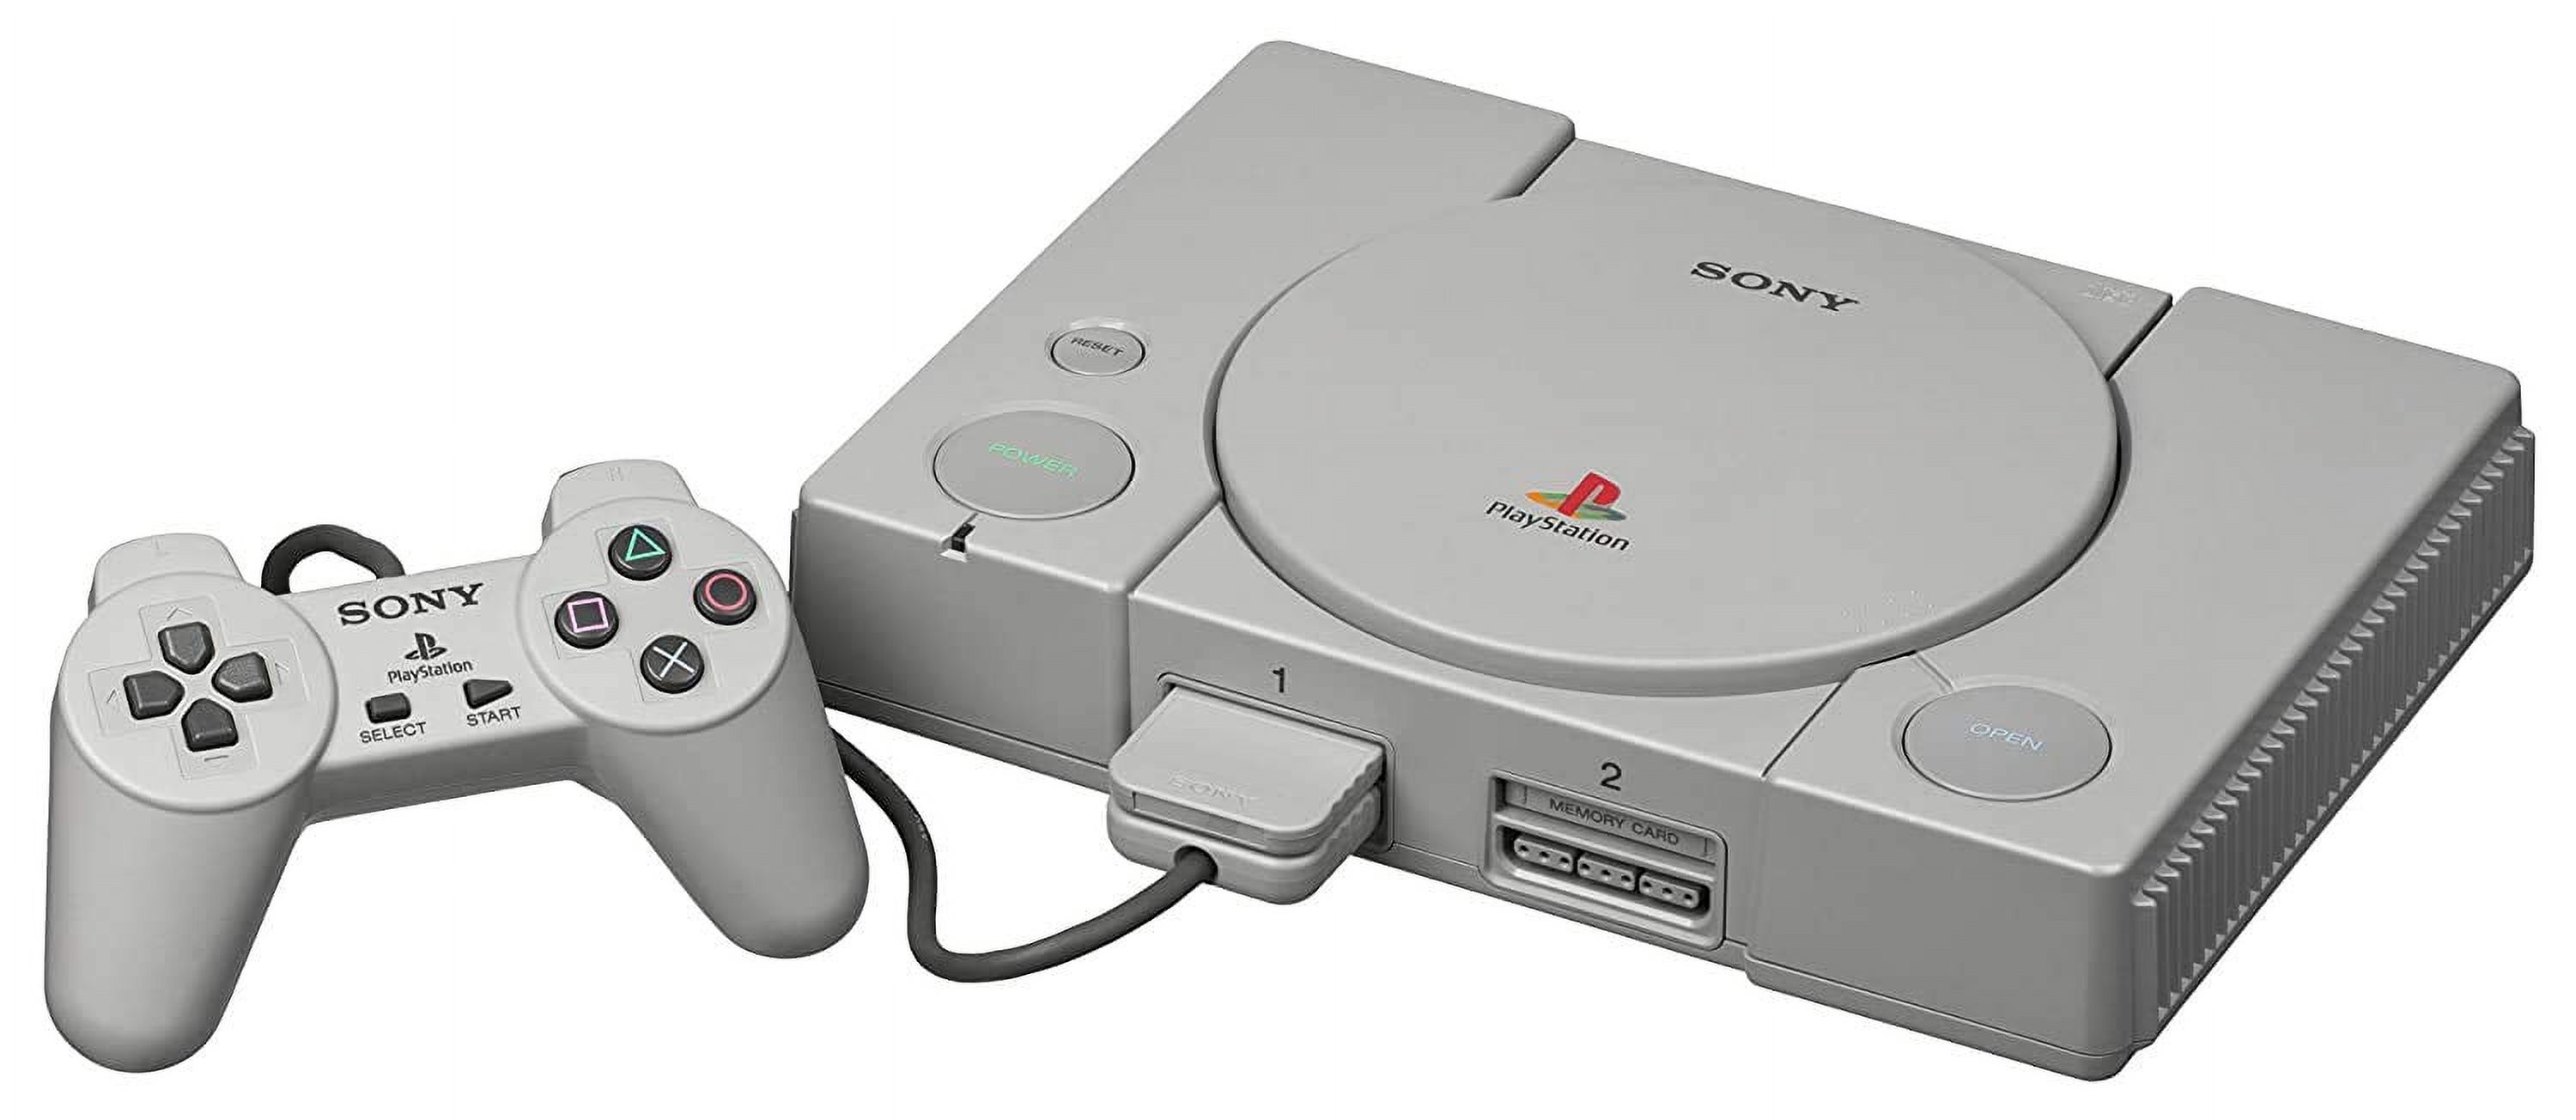 Restored Sony PlayStation 1 Console (Refurbished) - image 1 of 2